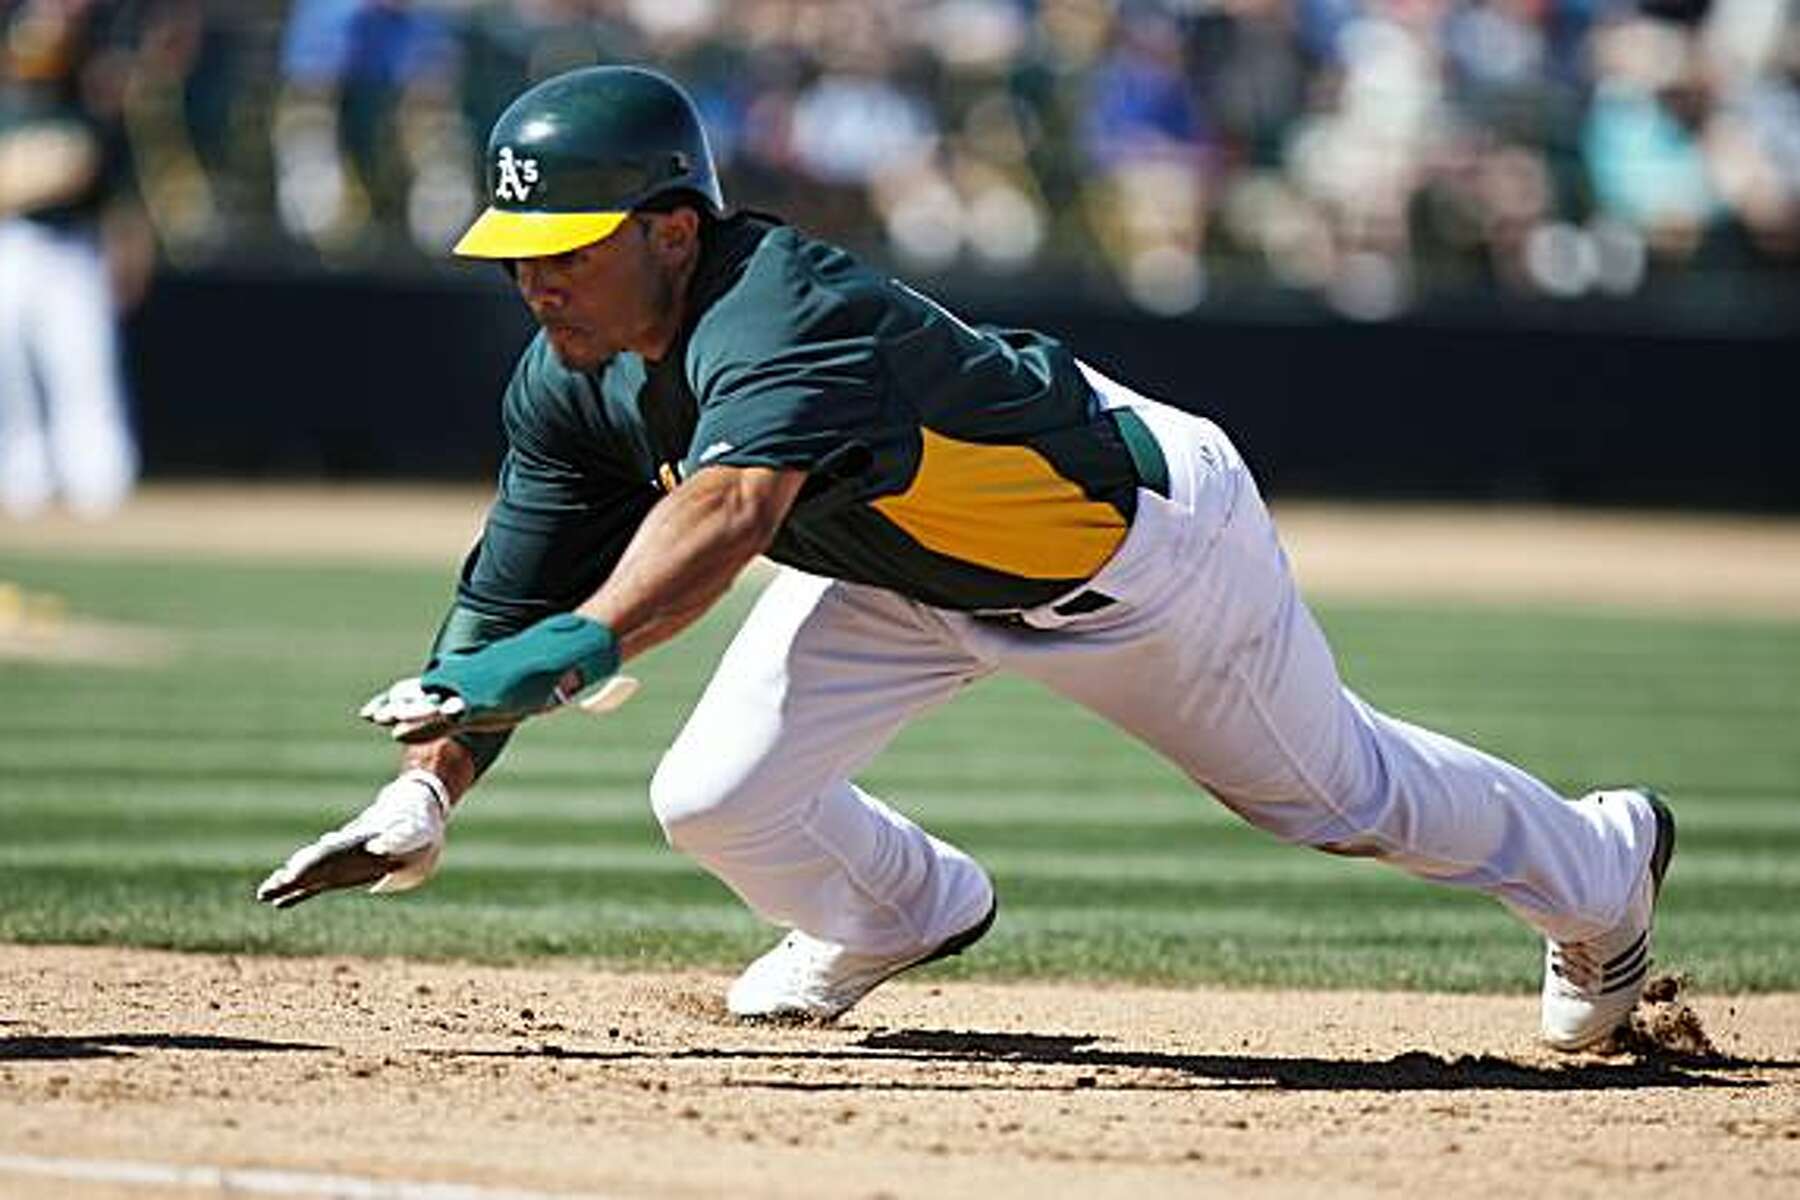 Coco Crisp Hitting 478 After 3 Hit Game